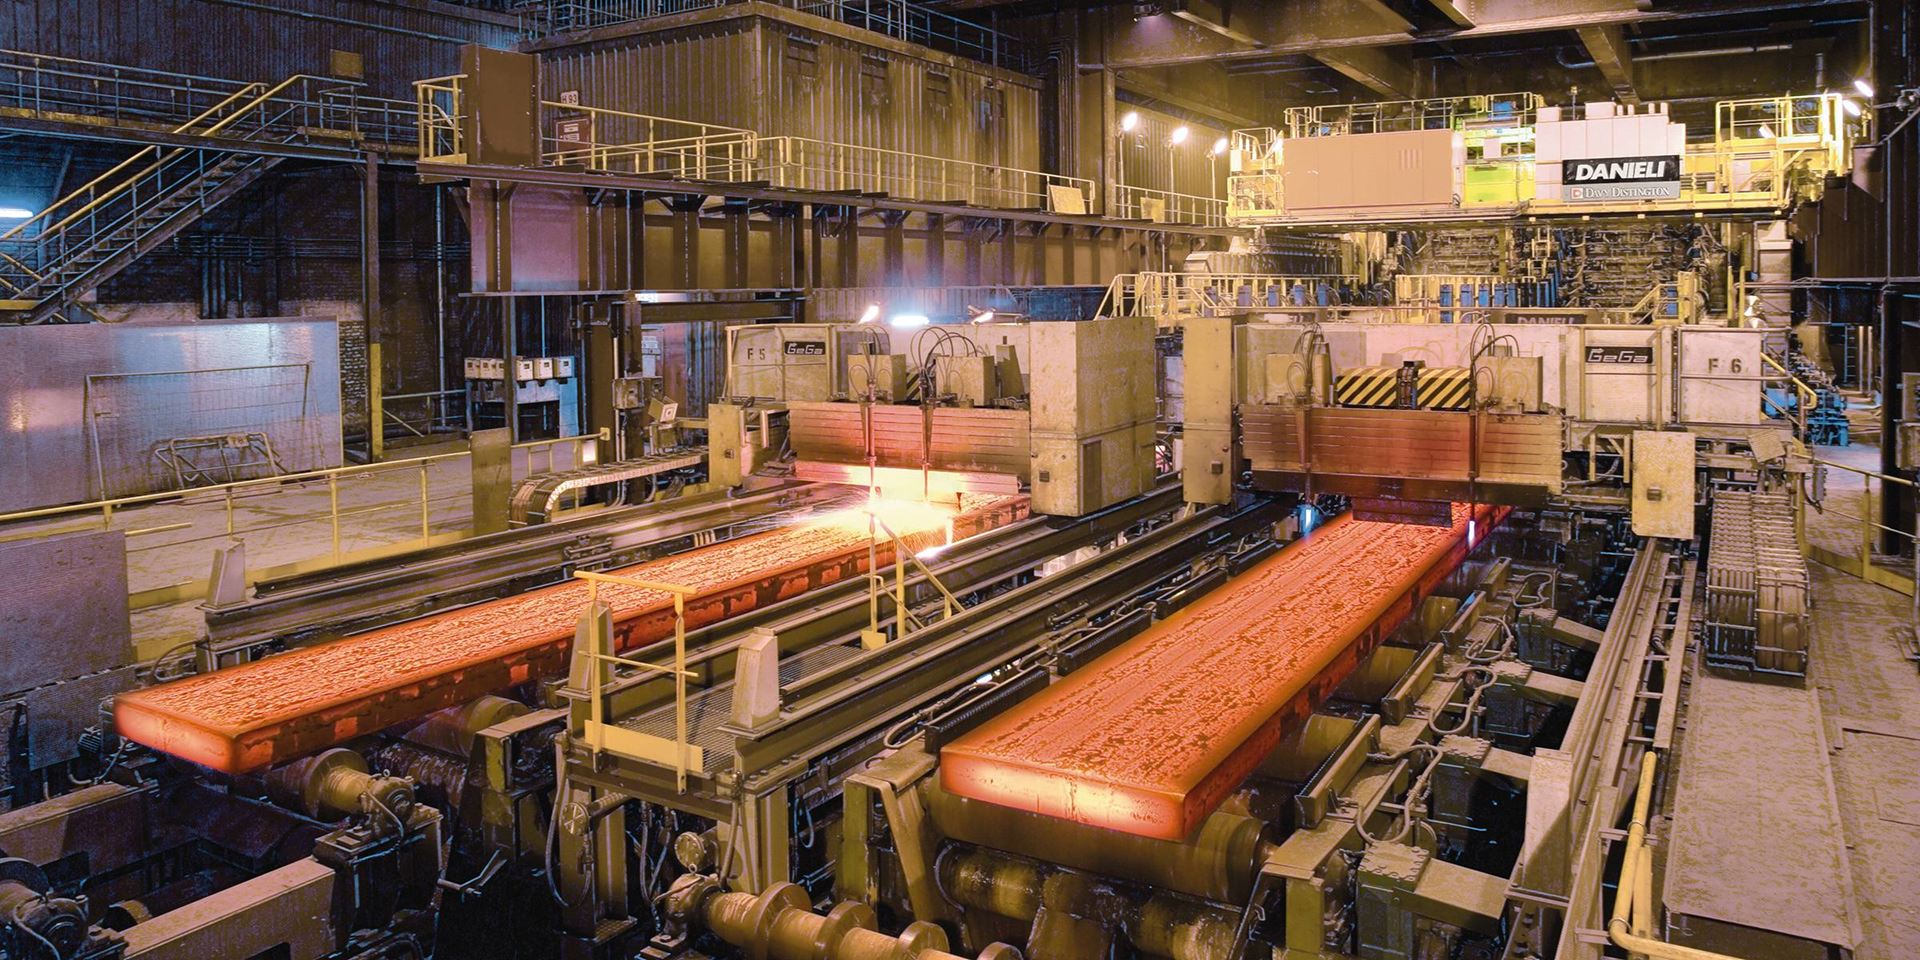 ArcelorMittal ordered a slab caster from Danieli 